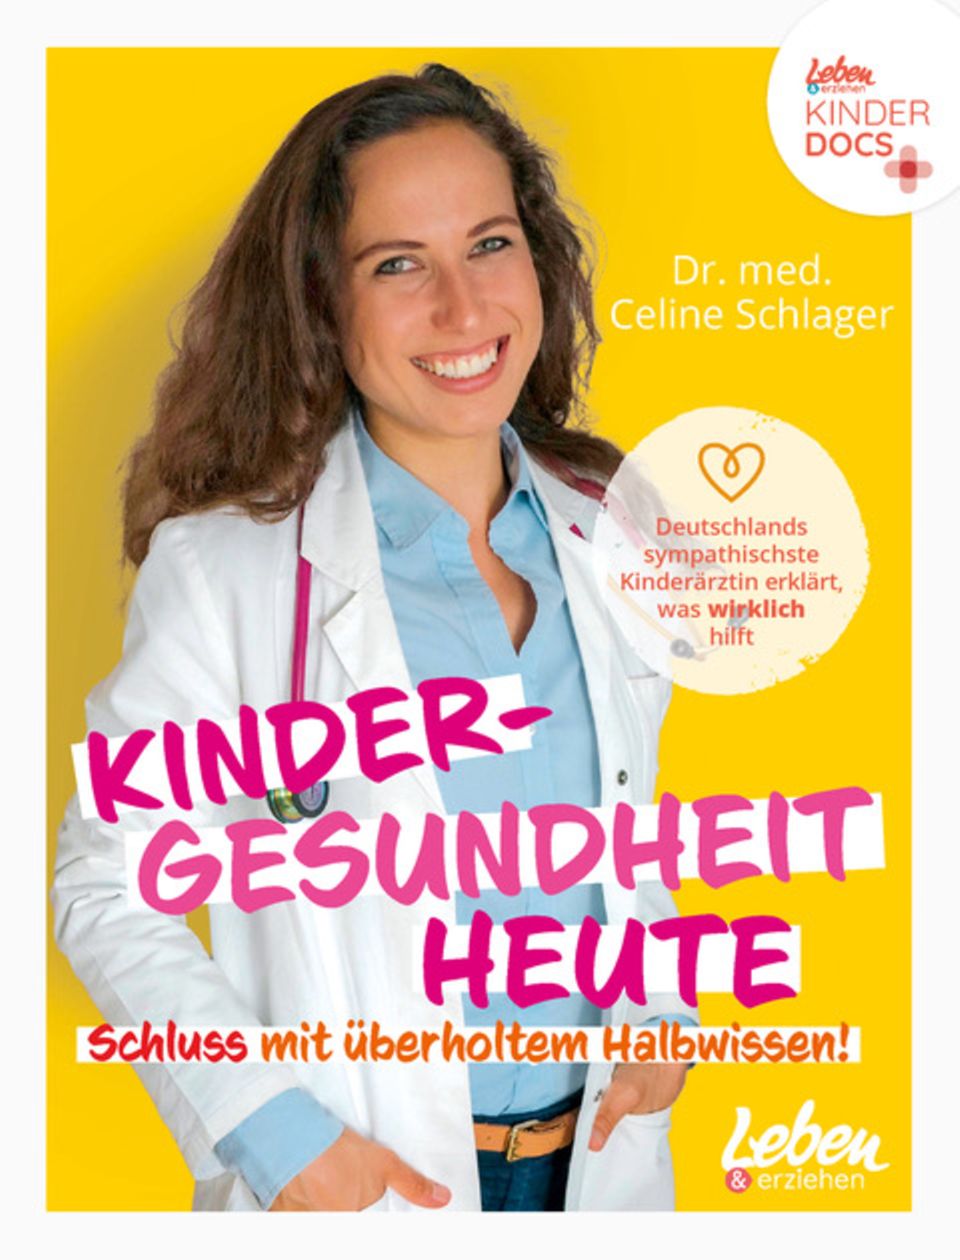 "Children's health today - no more outdated half-knowledge", Dr.  med.  Celine Schlager, Junior Media.  192 pages, 18.95 euros.  Available at Amazon, Buecher.de and Thalia.